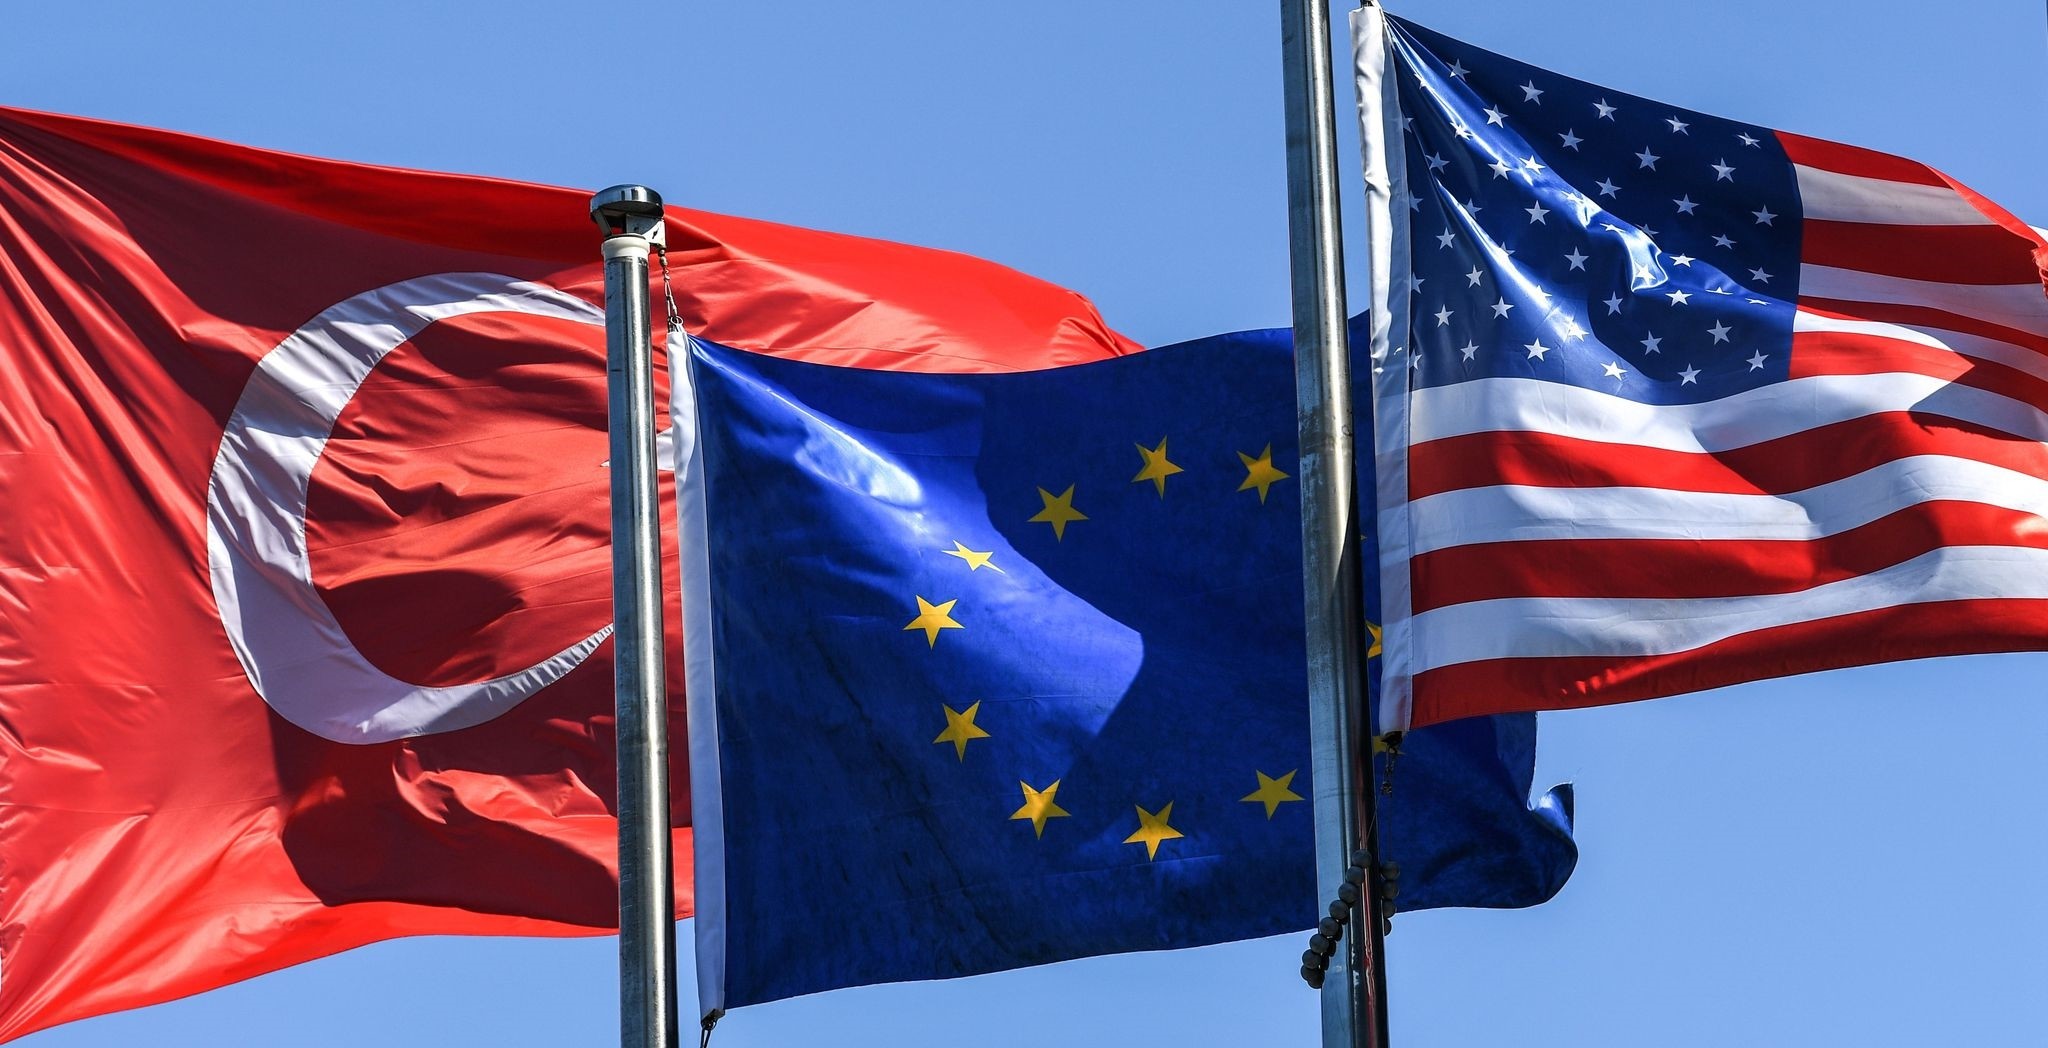 (From L) The Turkish flag, the European Union flag and the U.S. flag float in the wind in the financial and business district of Maslak, Istanbul, Aug. 15.